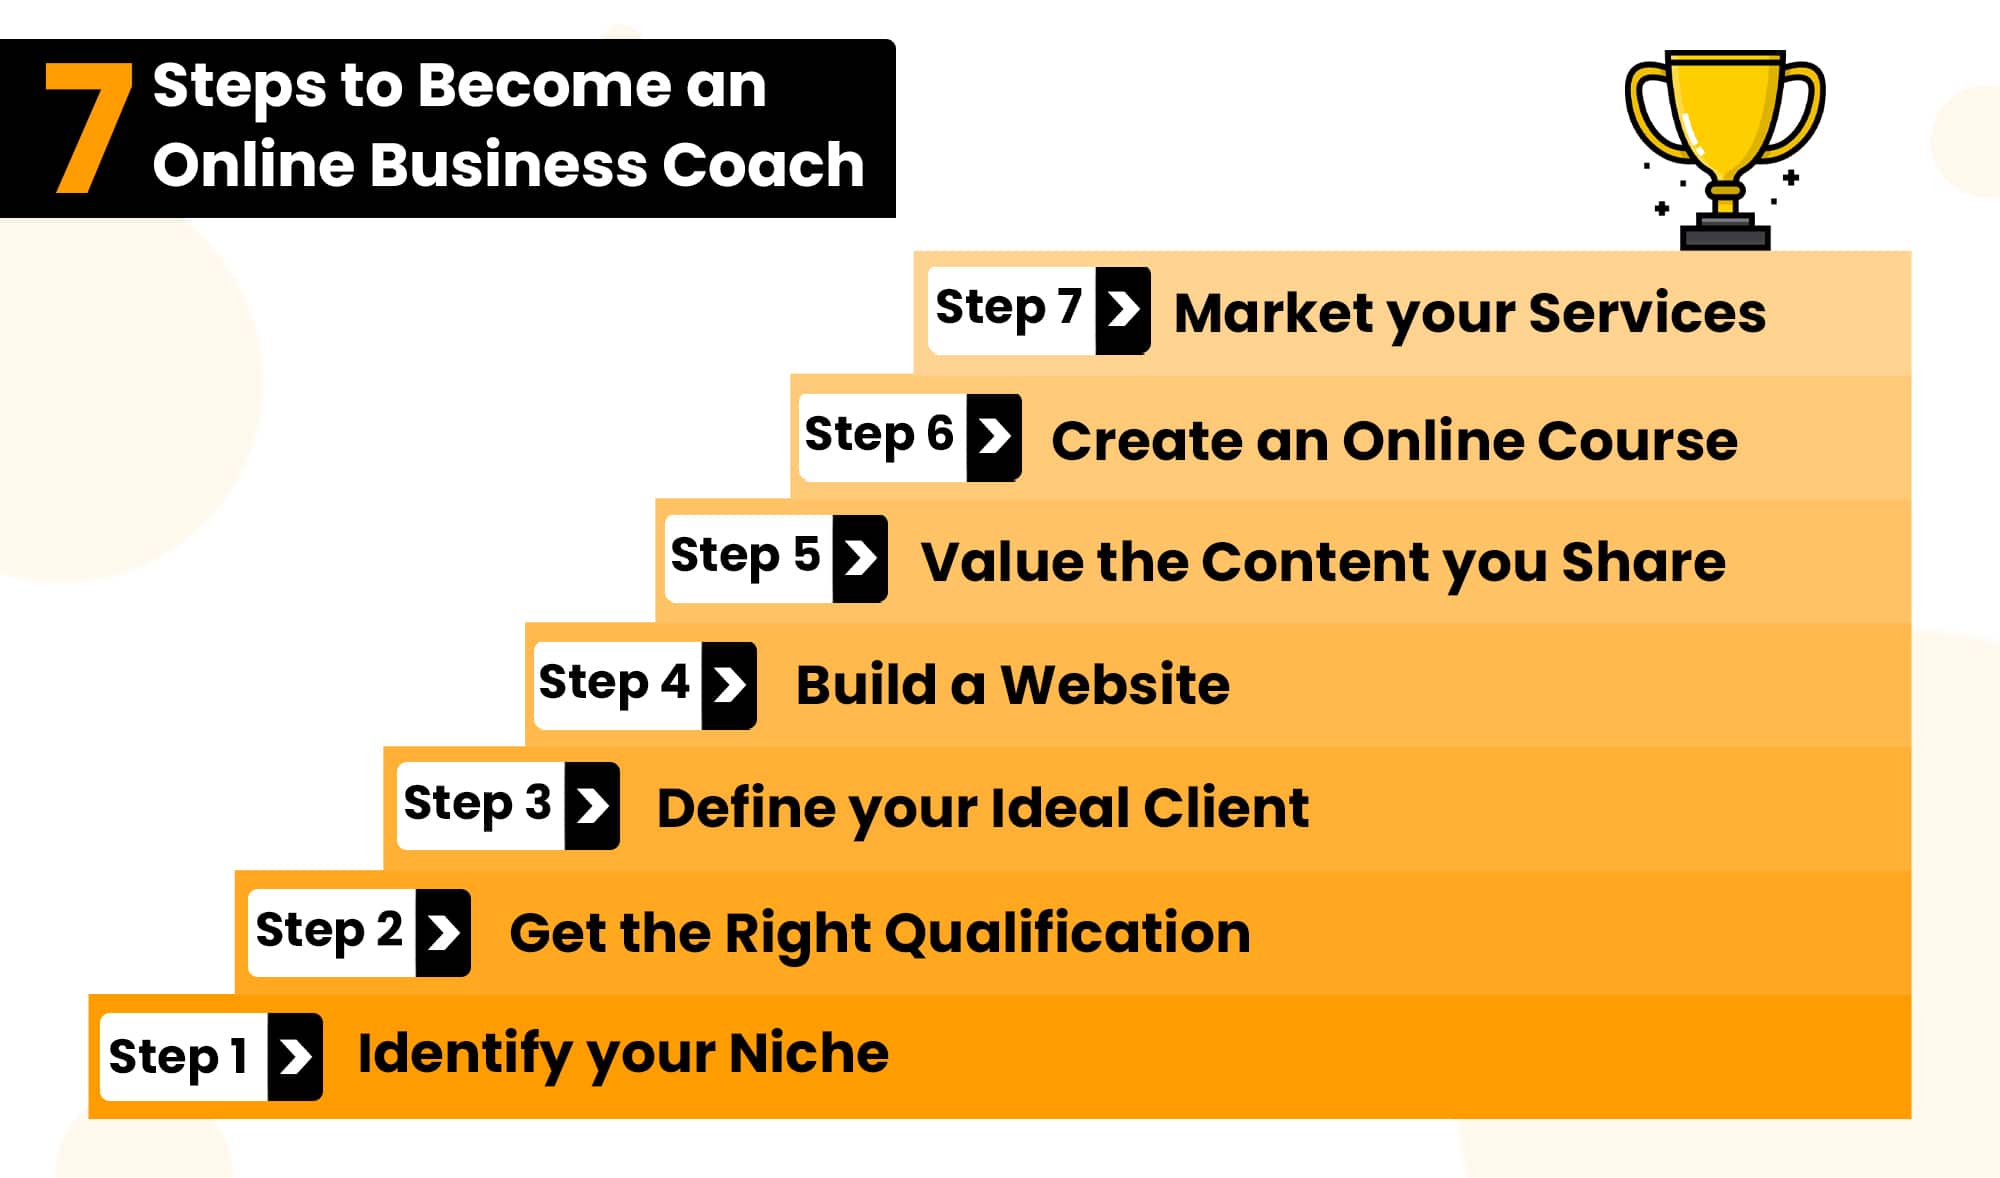 7 Steps to Become an Online Business Coach